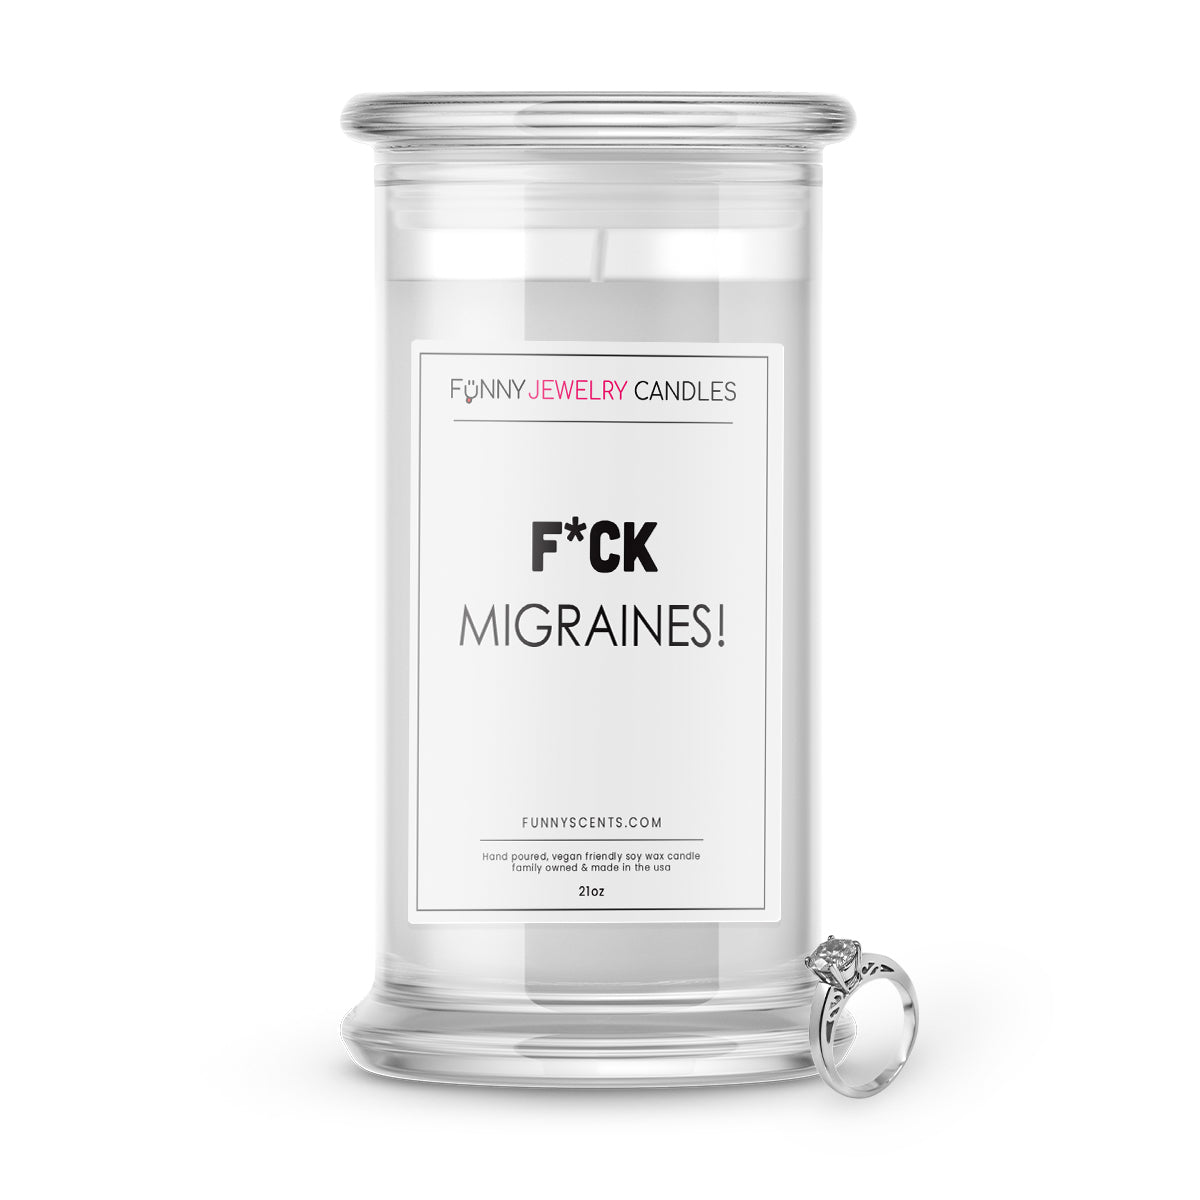 F*ck Migrains! Jewelry Funny Candles